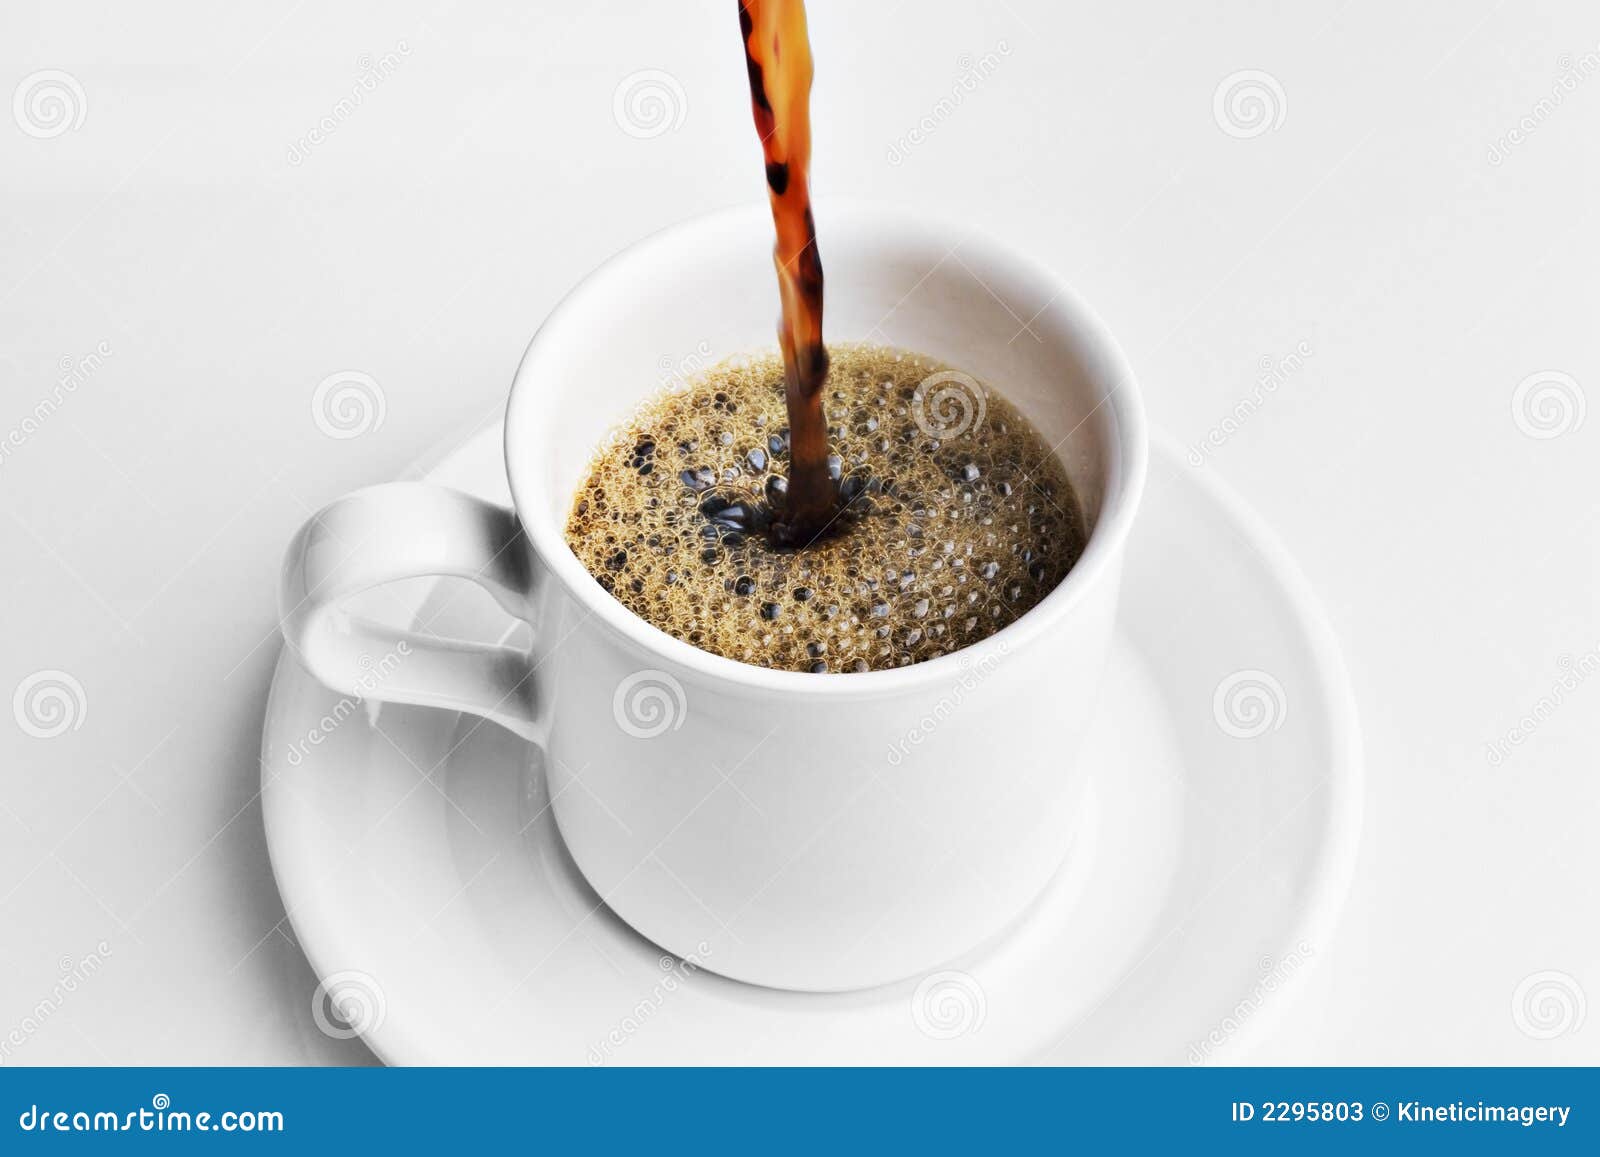 pouring-cup-coffee-2295803.jpg